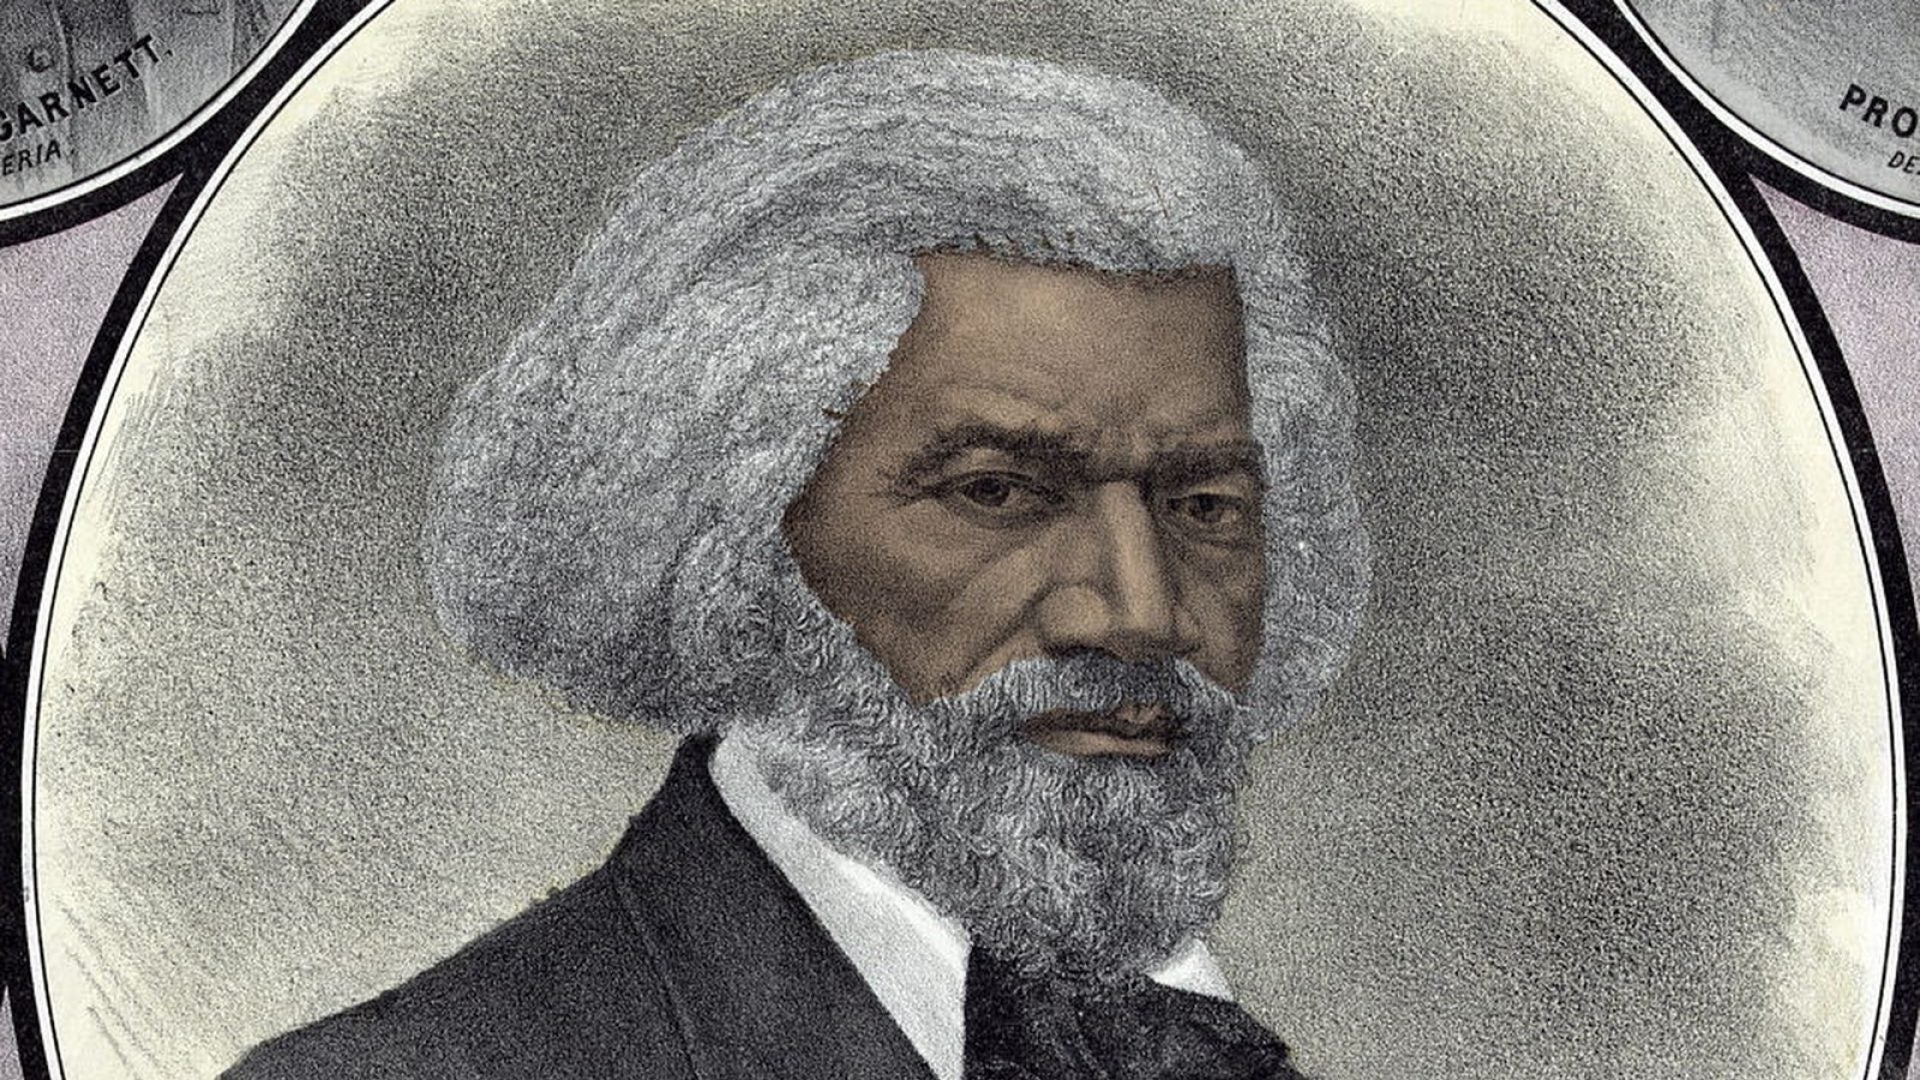 Conservative Group’s Video Shows Animated Frederick Douglass Calling Slavery A “Compromise To Achieve Something Great”